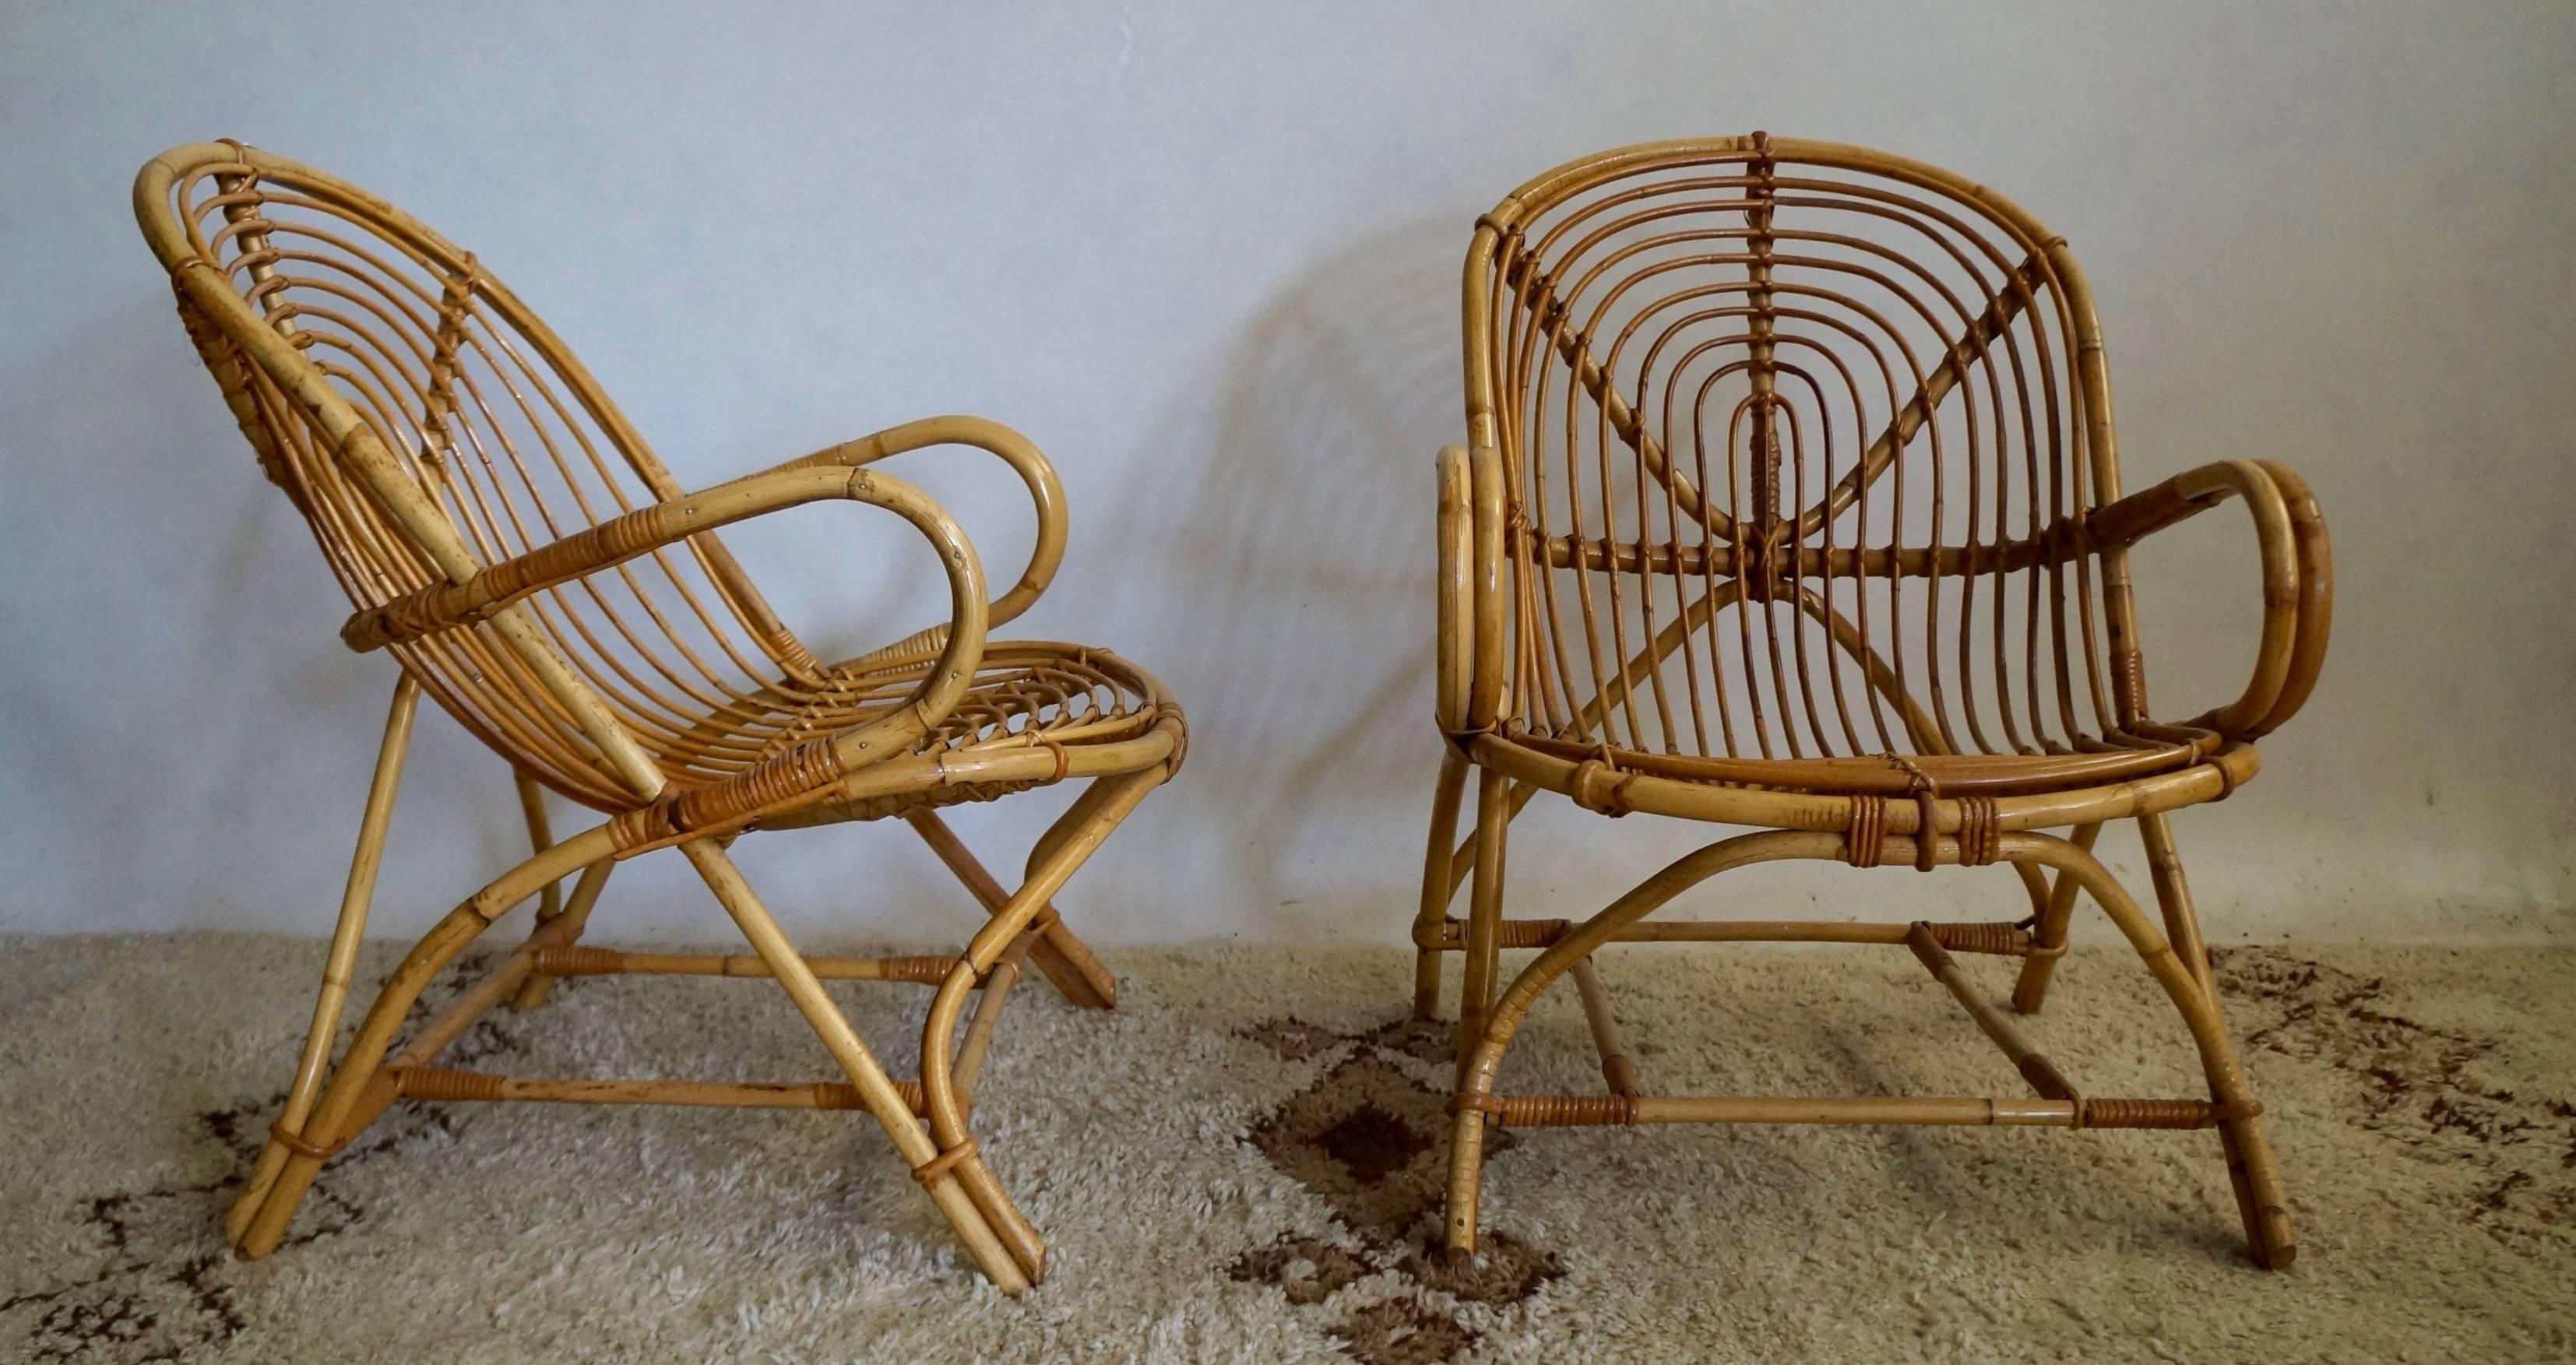 Set of 4 antique wicker chairs in original condition.